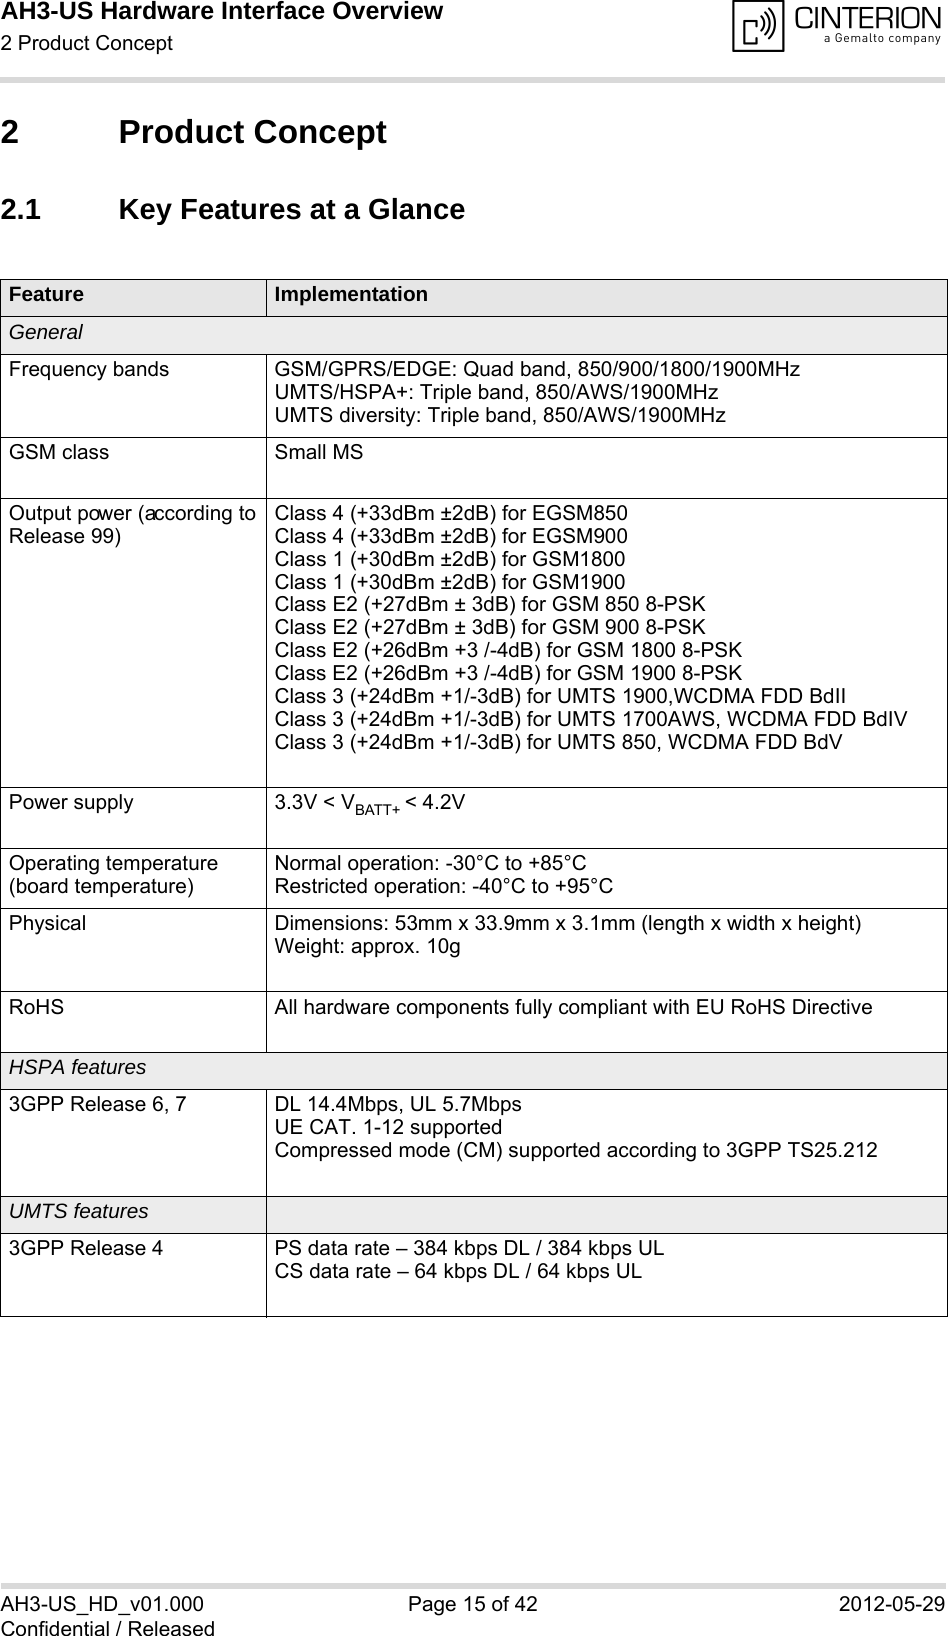 AH3-US Hardware Interface Overview2 Product Concept18AH3-US_HD_v01.000 Page 15 of 42 2012-05-29Confidential / Released2 Product Concept2.1 Key Features at a GlanceFeature ImplementationGeneralFrequency bands GSM/GPRS/EDGE: Quad band, 850/900/1800/1900MHzUMTS/HSPA+: Triple band, 850/AWS/1900MHzUMTS diversity: Triple band, 850/AWS/1900MHzGSM class Small MSOutput power (according to  Release 99)Class 4 (+33dBm ±2dB) for EGSM850Class 4 (+33dBm ±2dB) for EGSM900Class 1 (+30dBm ±2dB) for GSM1800Class 1 (+30dBm ±2dB) for GSM1900Class E2 (+27dBm ± 3dB) for GSM 850 8-PSKClass E2 (+27dBm ± 3dB) for GSM 900 8-PSKClass E2 (+26dBm +3 /-4dB) for GSM 1800 8-PSKClass E2 (+26dBm +3 /-4dB) for GSM 1900 8-PSKClass 3 (+24dBm +1/-3dB) for UMTS 1900,WCDMA FDD BdIIClass 3 (+24dBm +1/-3dB) for UMTS 1700AWS, WCDMA FDD BdIVClass 3 (+24dBm +1/-3dB) for UMTS 850, WCDMA FDD BdVPower supply 3.3V &lt; VBATT+ &lt; 4.2VOperating temperature(board temperature)Normal operation: -30°C to +85°CRestricted operation: -40°C to +95°CPhysical Dimensions: 53mm x 33.9mm x 3.1mm (length x width x height)Weight: approx. 10gRoHS All hardware components fully compliant with EU RoHS DirectiveHSPA features3GPP Release 6, 7 DL 14.4Mbps, UL 5.7MbpsUE CAT. 1-12 supportedCompressed mode (CM) supported according to 3GPP TS25.212UMTS features3GPP Release 4 PS data rate – 384 kbps DL / 384 kbps ULCS data rate – 64 kbps DL / 64 kbps UL